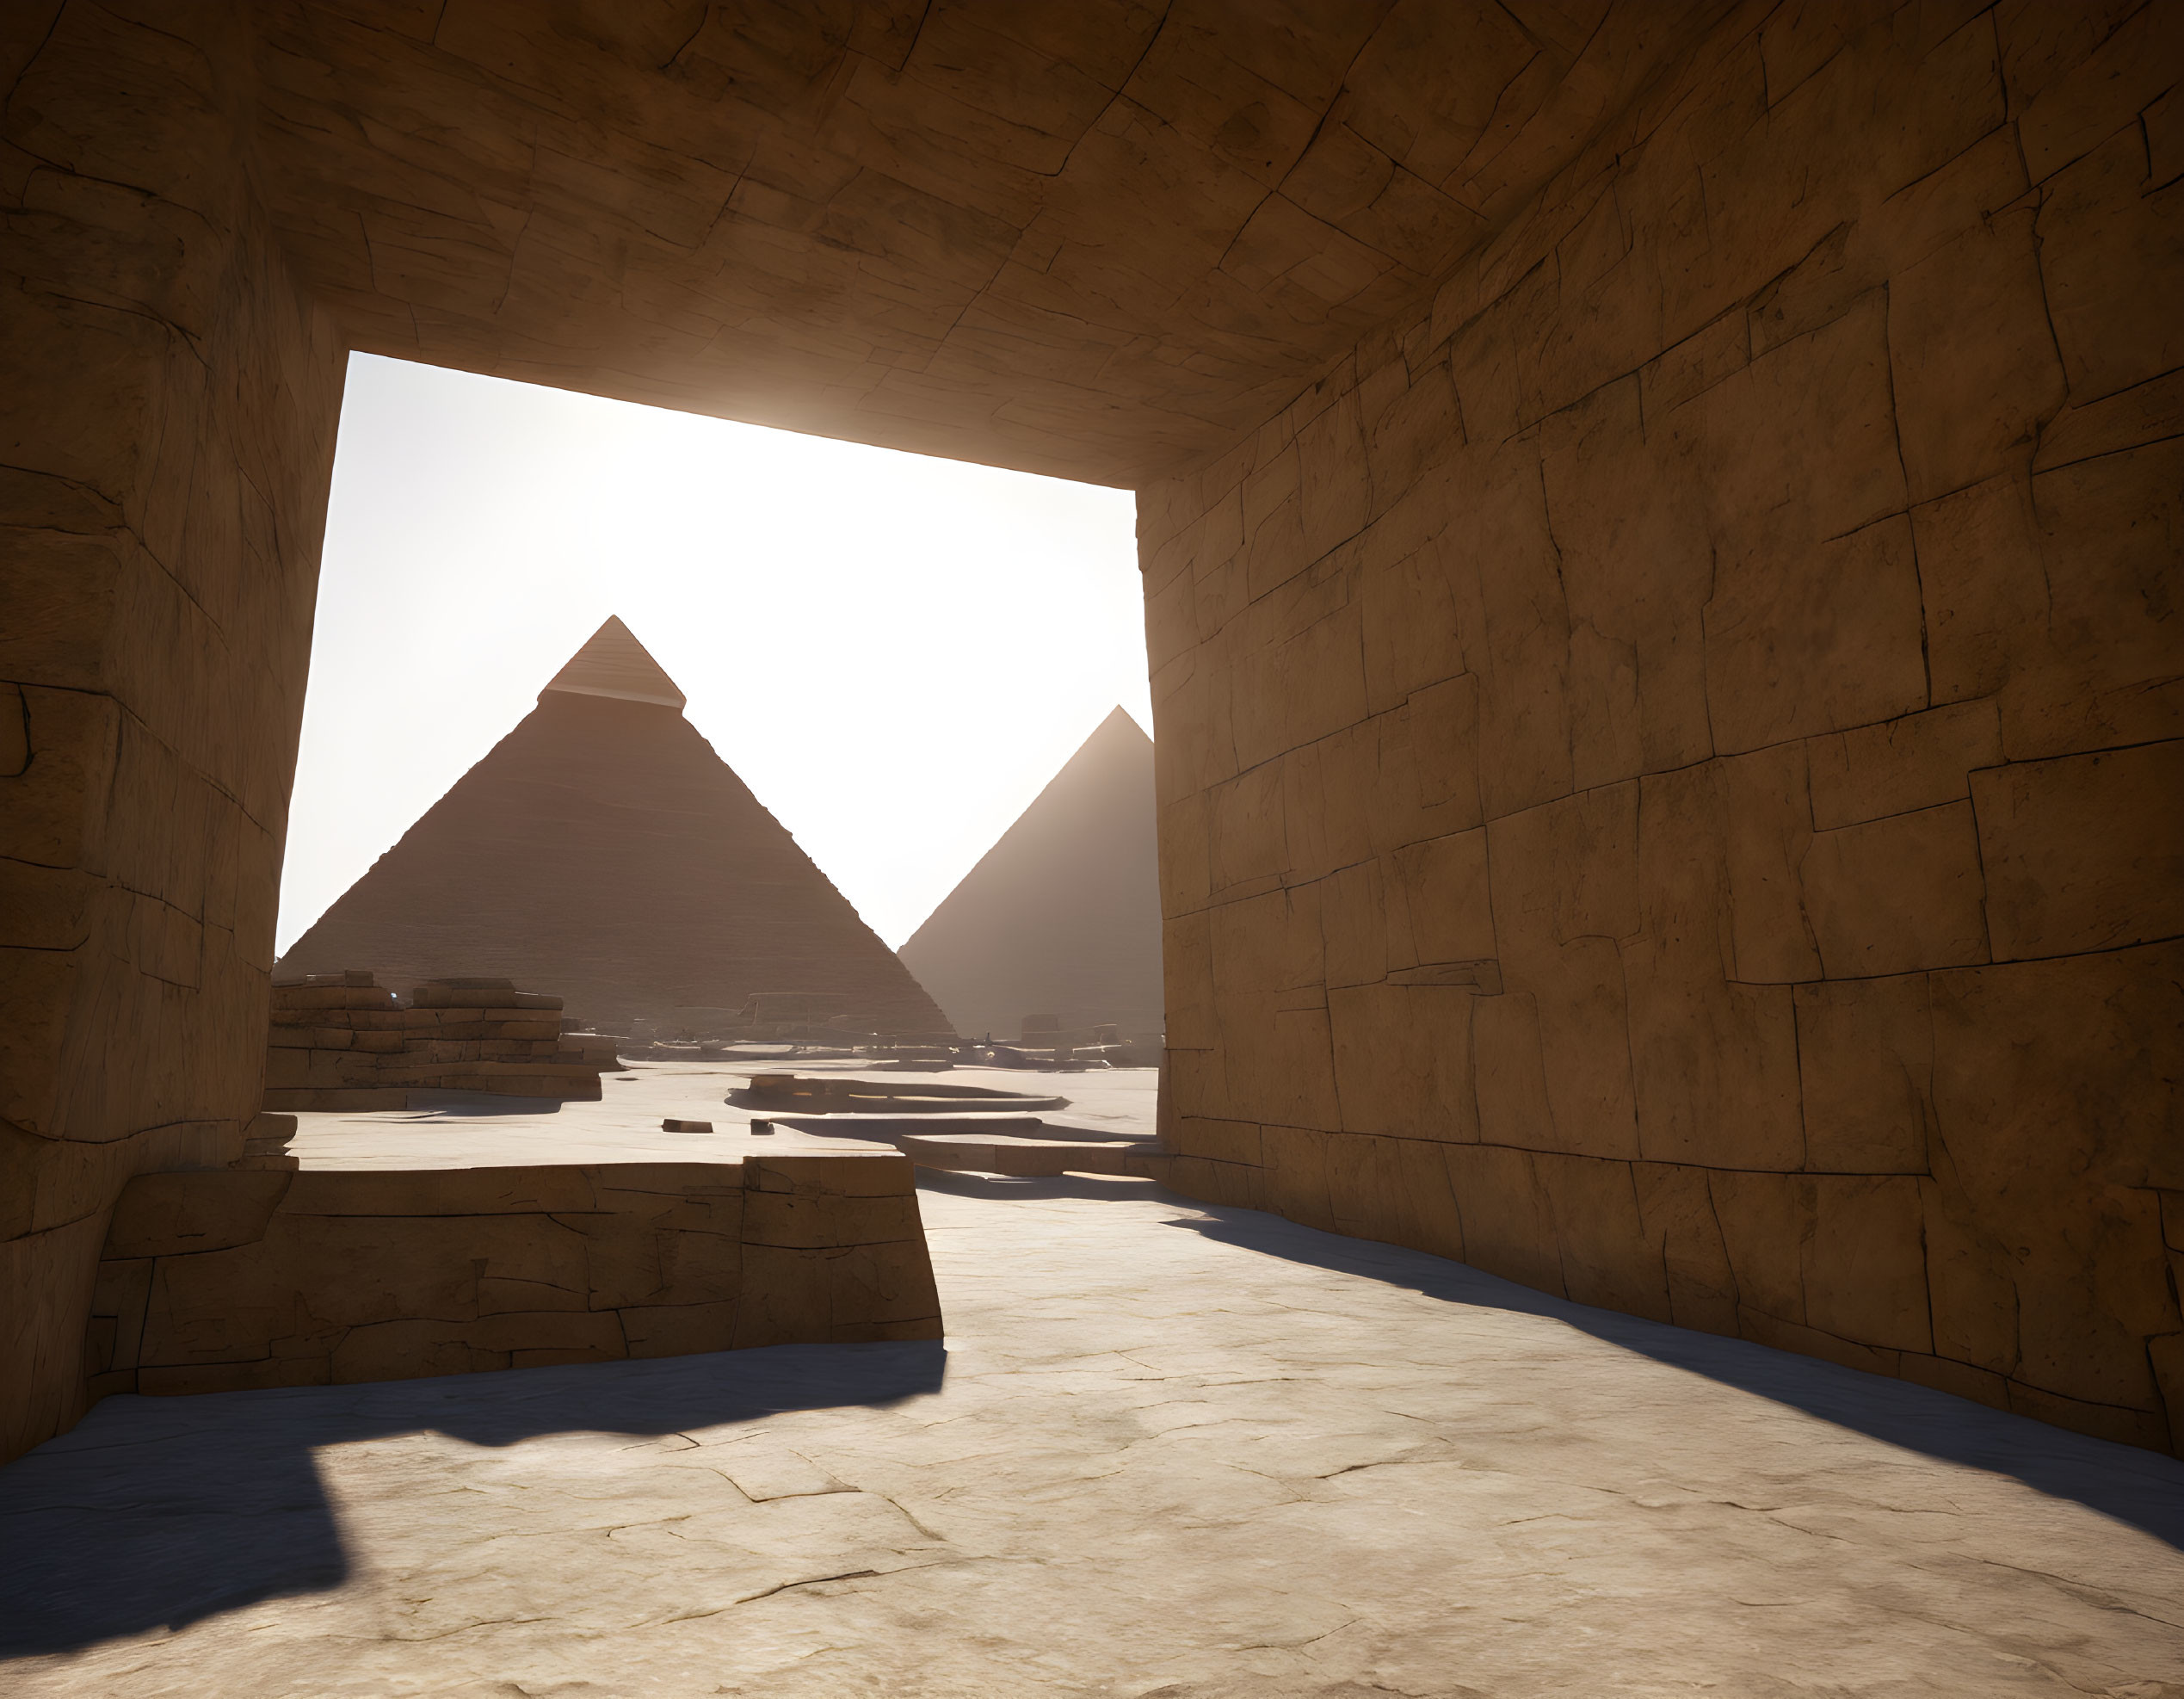 Egyptian Pyramids Silhouetted in Sunlight from Ancient Stone Structure